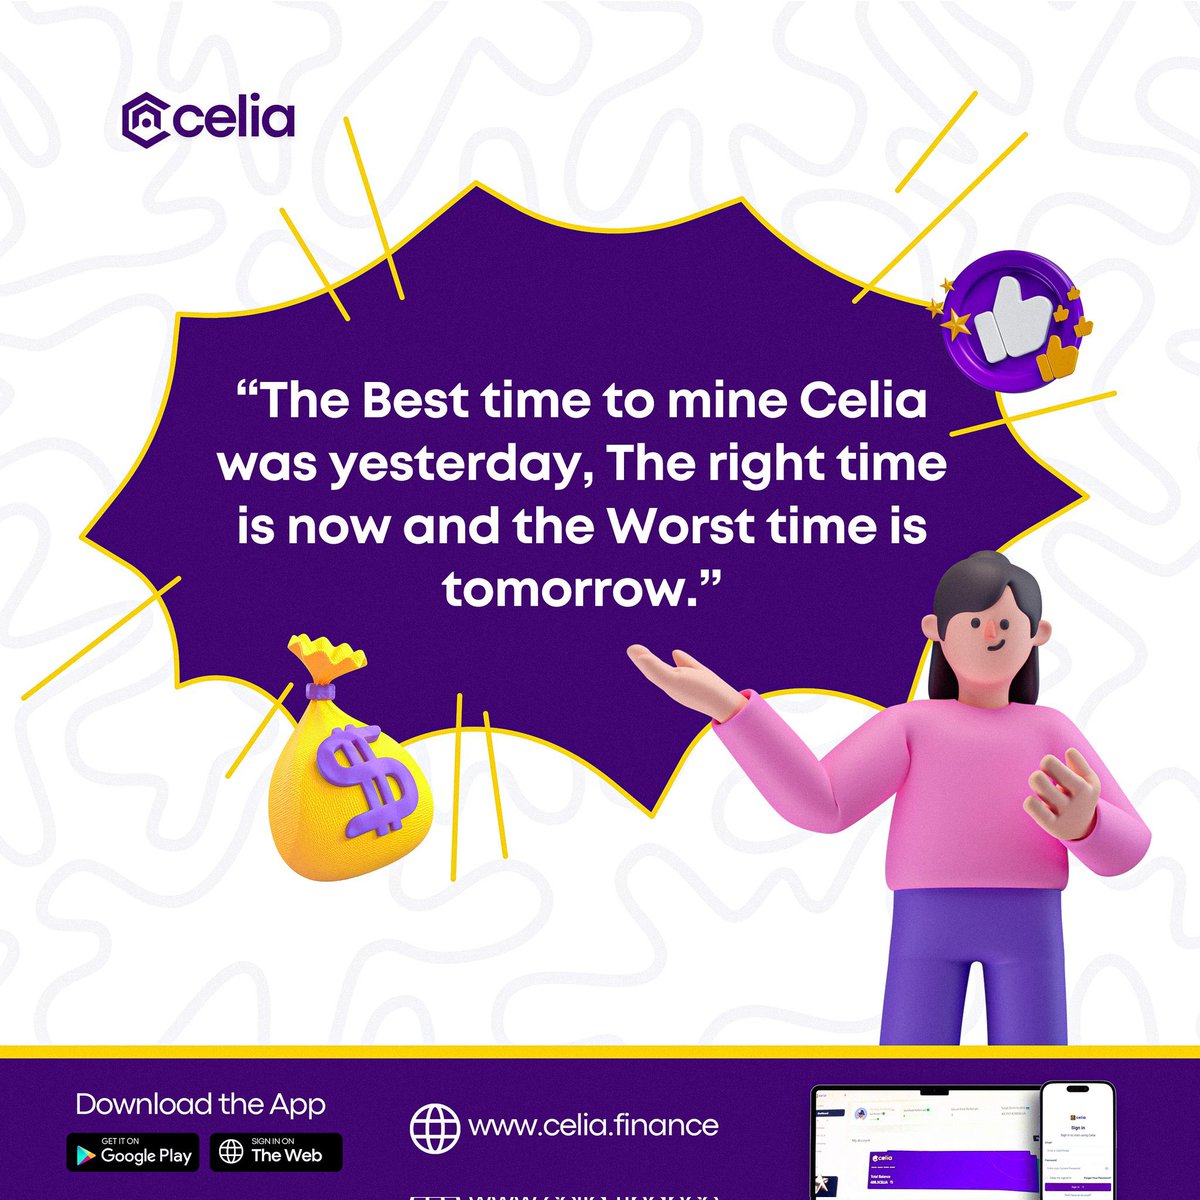 Mining $CELIA is a very temporary phase and will be ending soon. How many Celia token do you have so far?